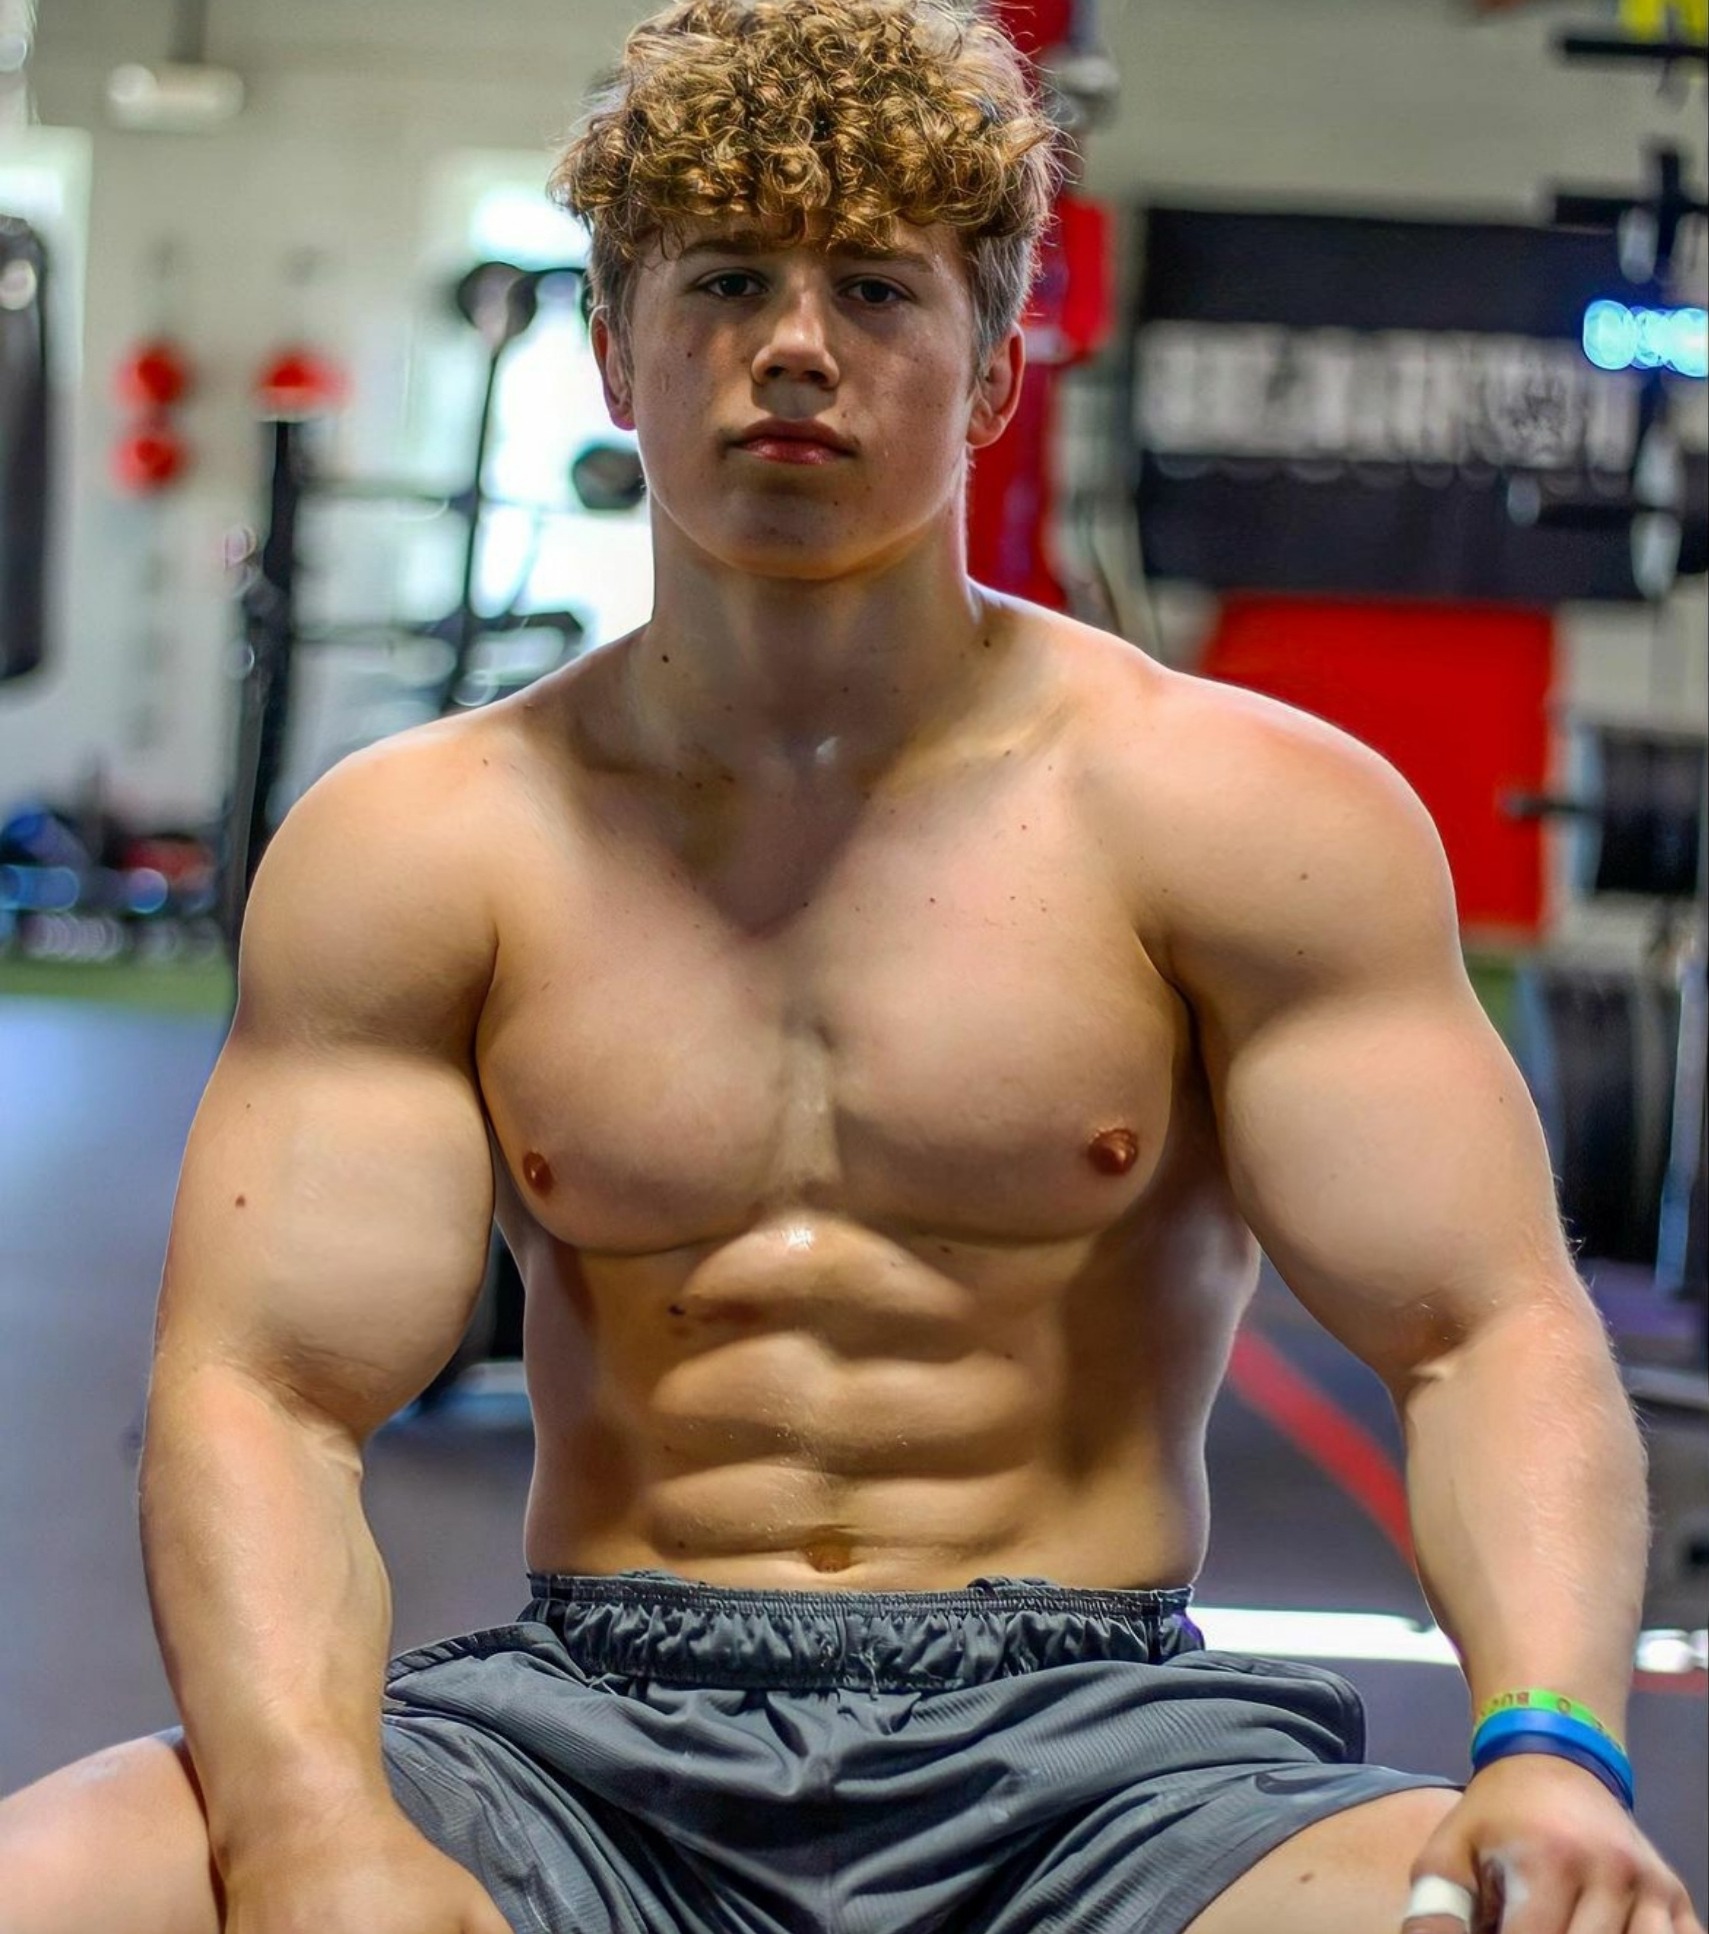 Sex aestheticsupremacy:musclewizard69:The growth pictures